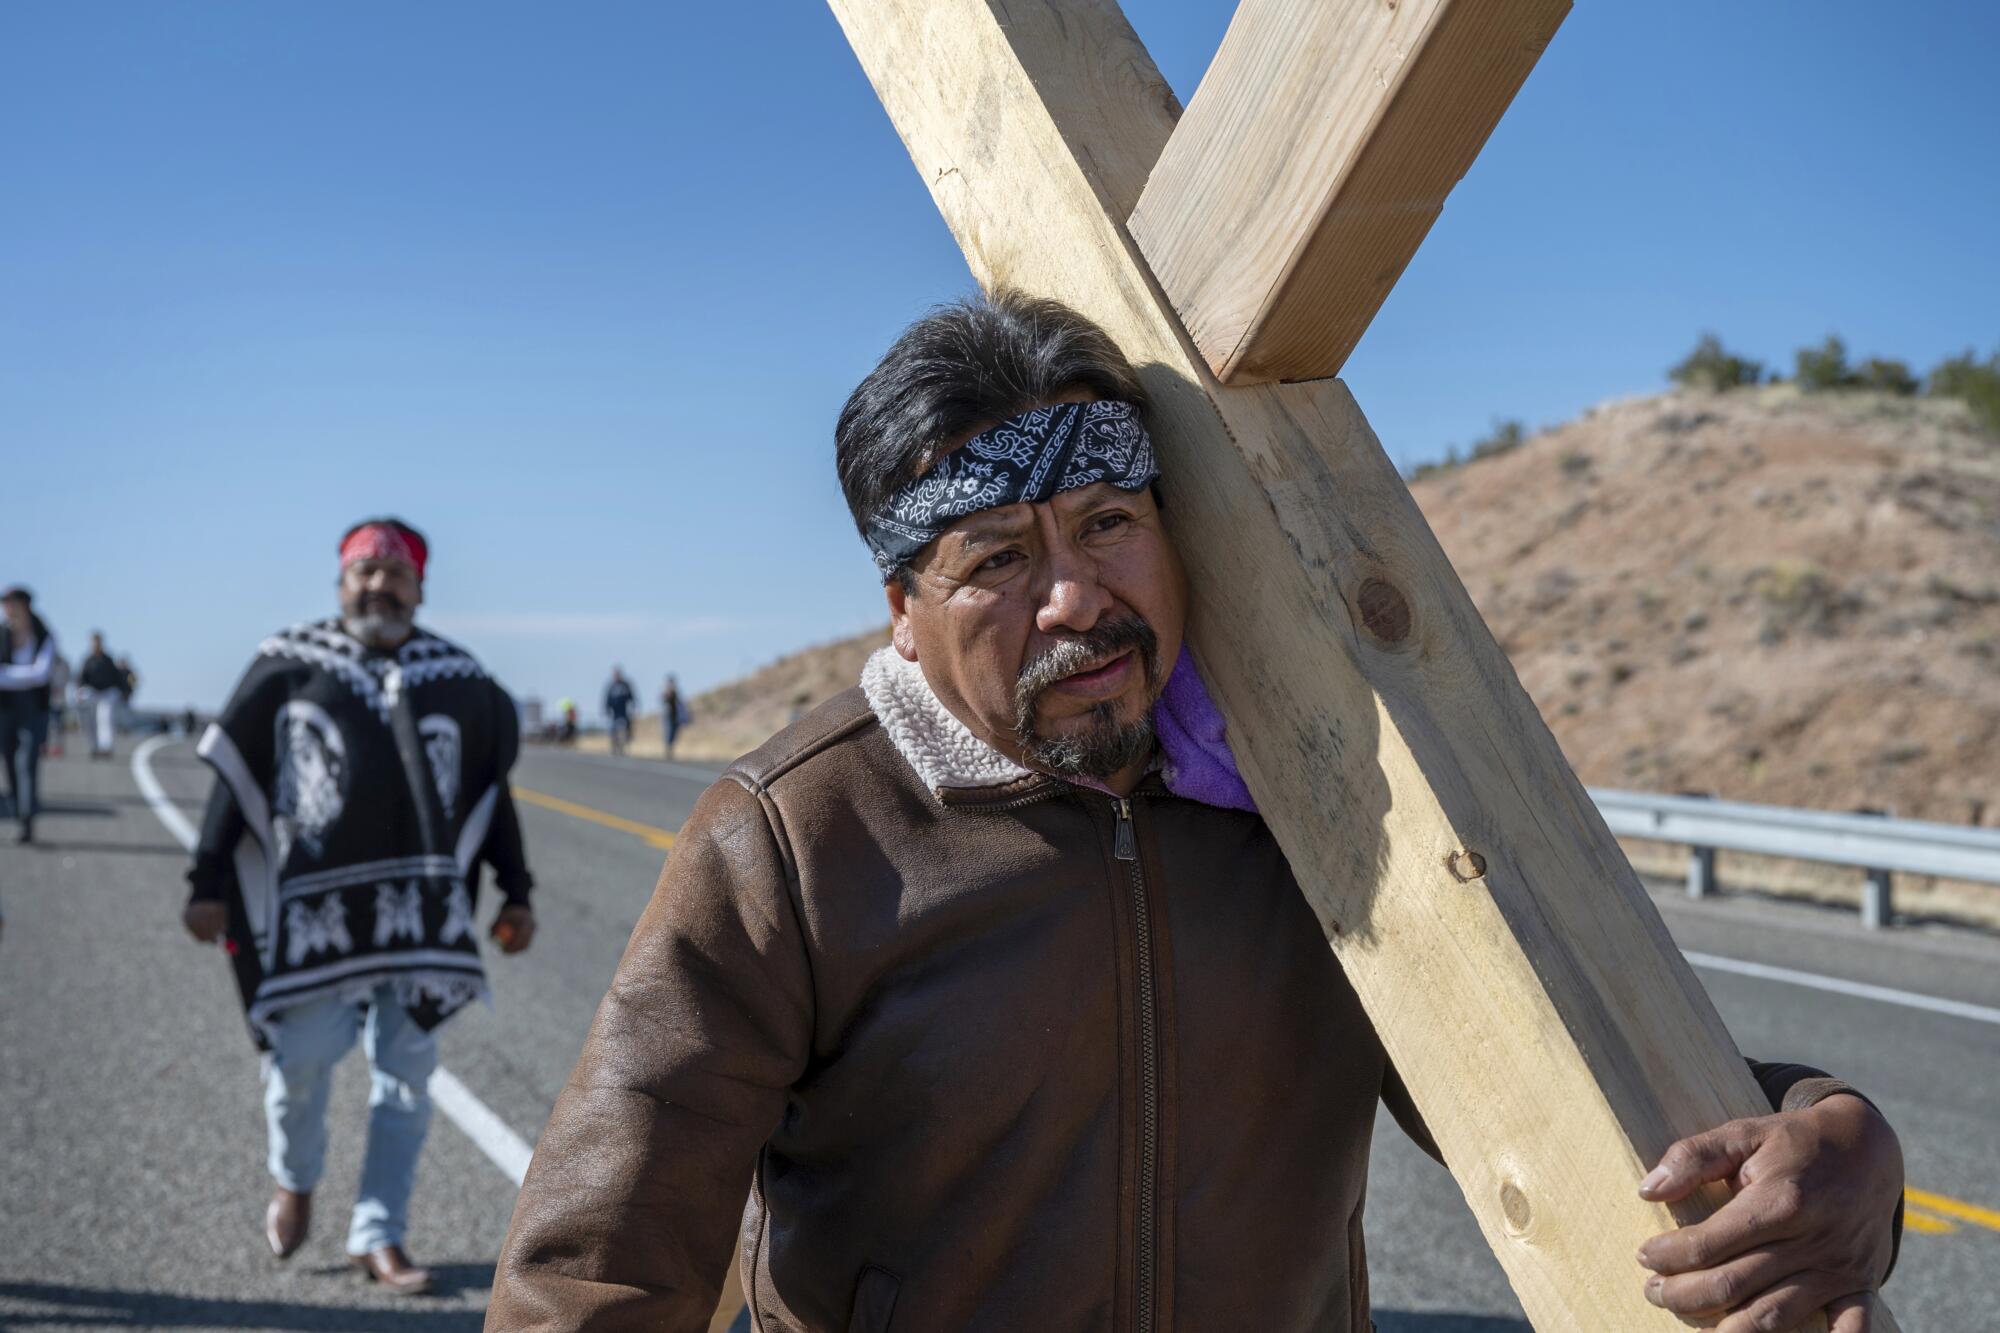 Two men walk along a highway, one of them caring a large wooden cross on his shoulder